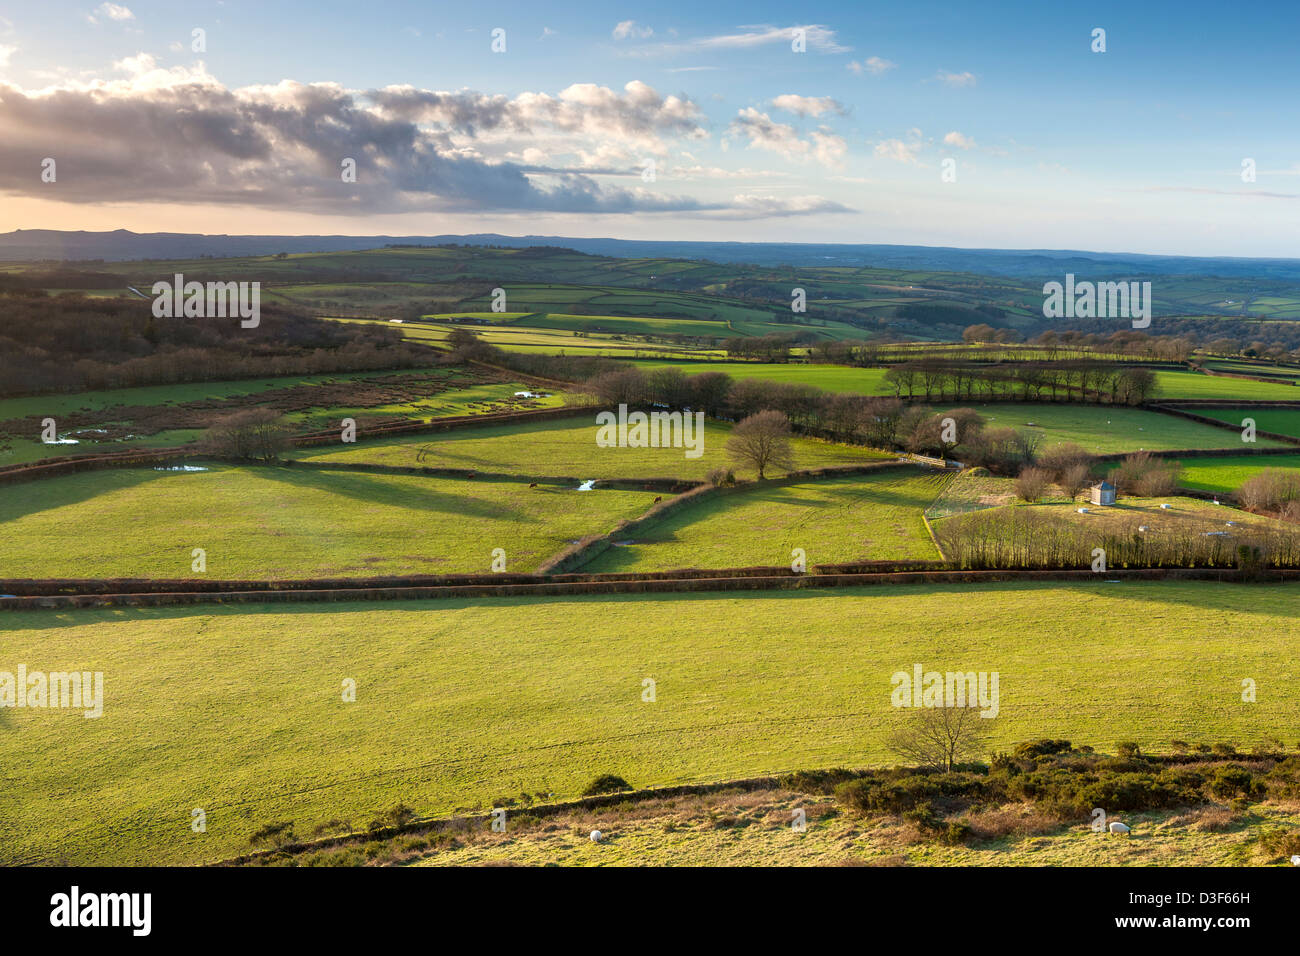 View from the Church of St Michael on top of Brent Tor over the rural Dartmoor landscape, Devon, England, UK, Europe. Stock Photo